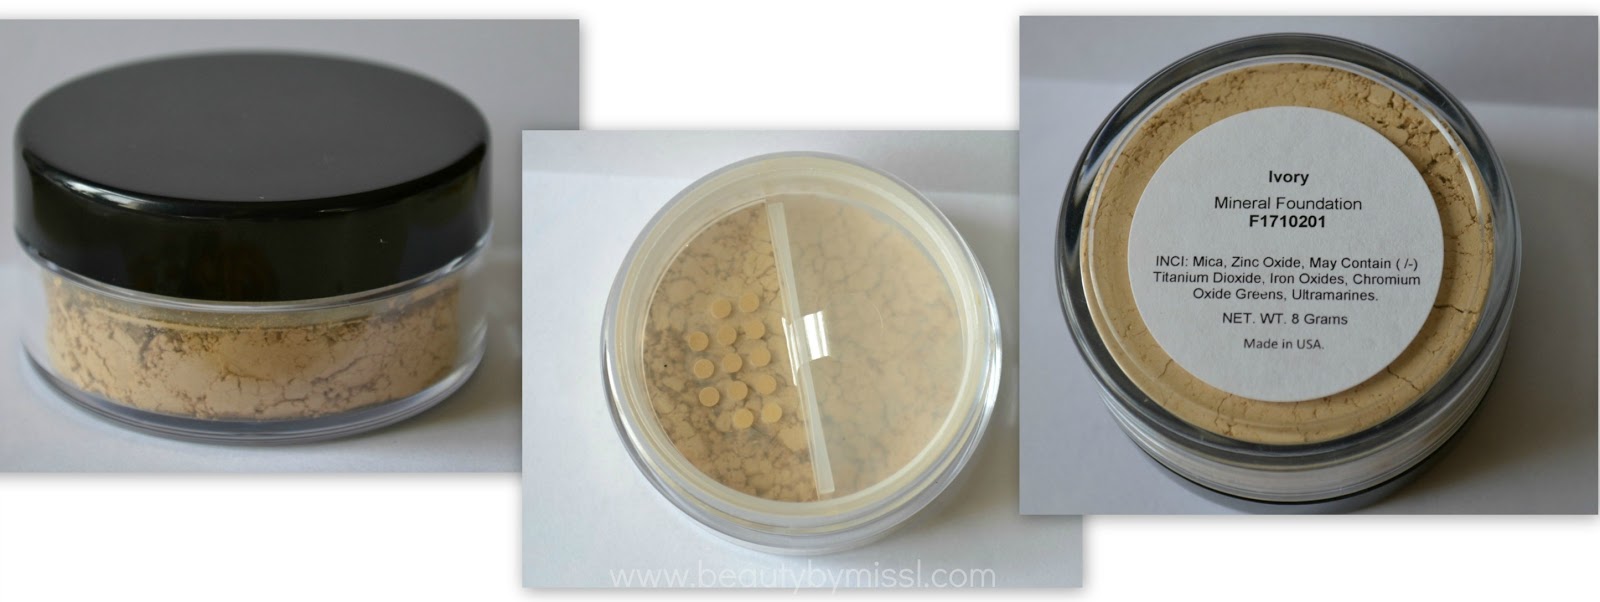 Mineral Foundation in Ivory from Candy Minerals